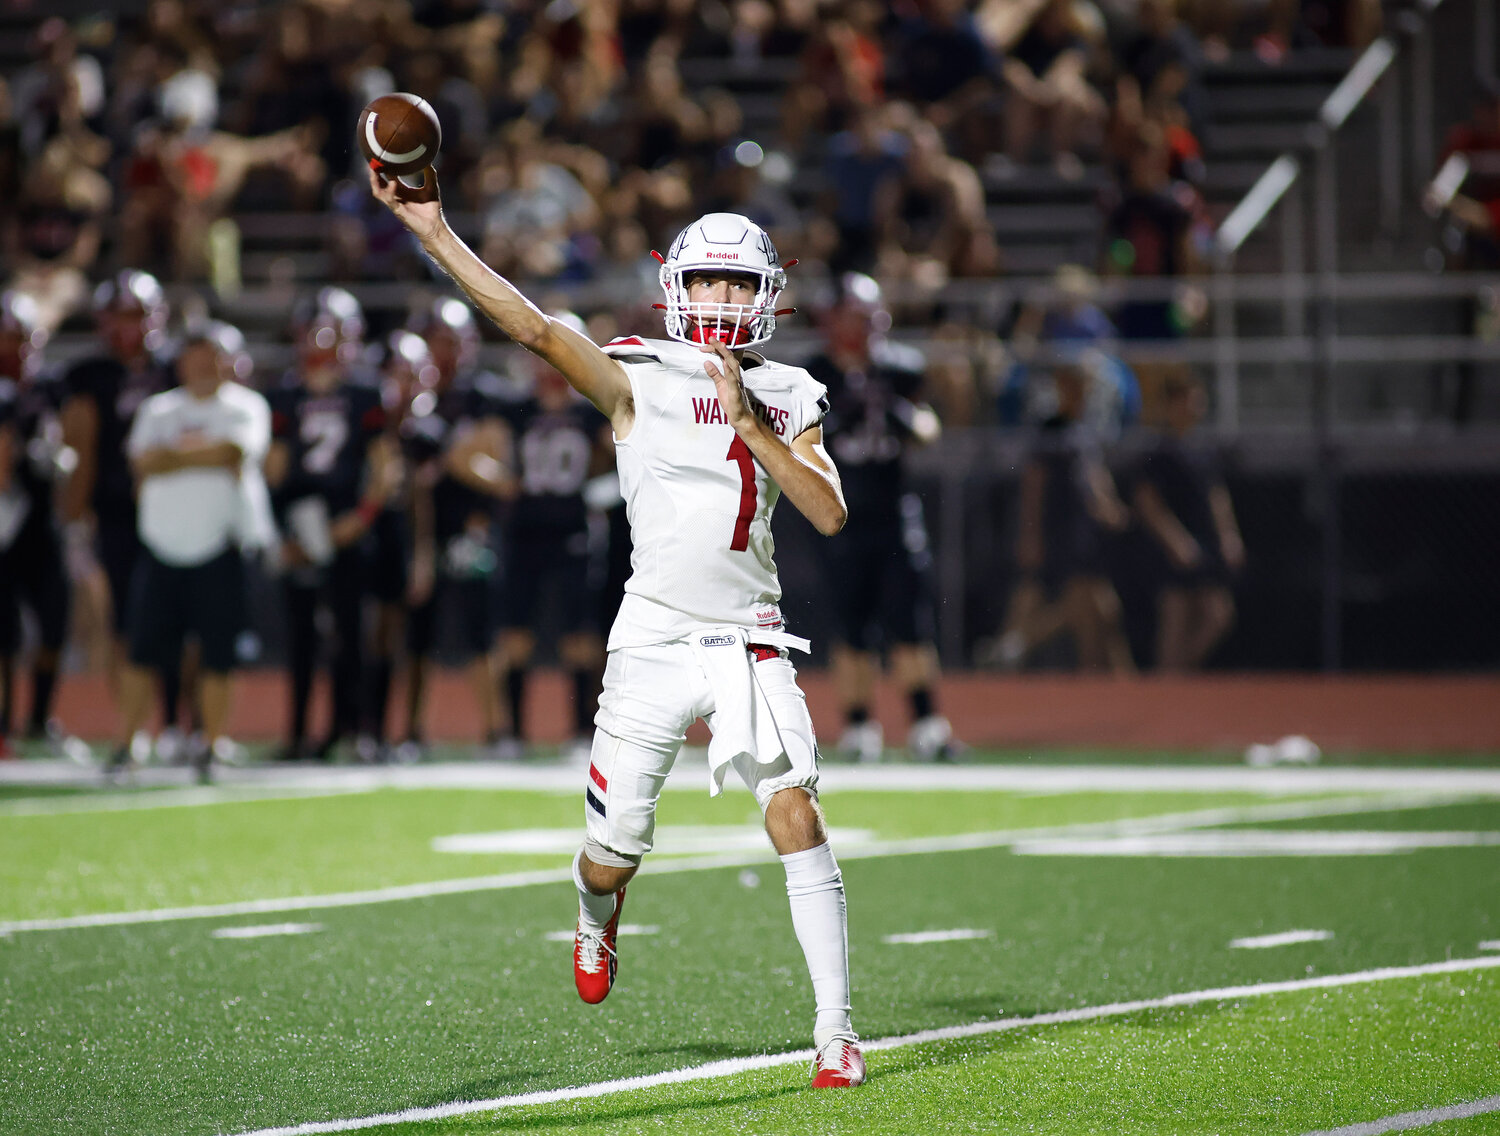 Warrenton's Charlie Blondin (1) passes during a game against Fort Zumwalt South, Friday, Aug. 25, 2023, at Fort Zumwalt South High School in St. Peters, Mo.